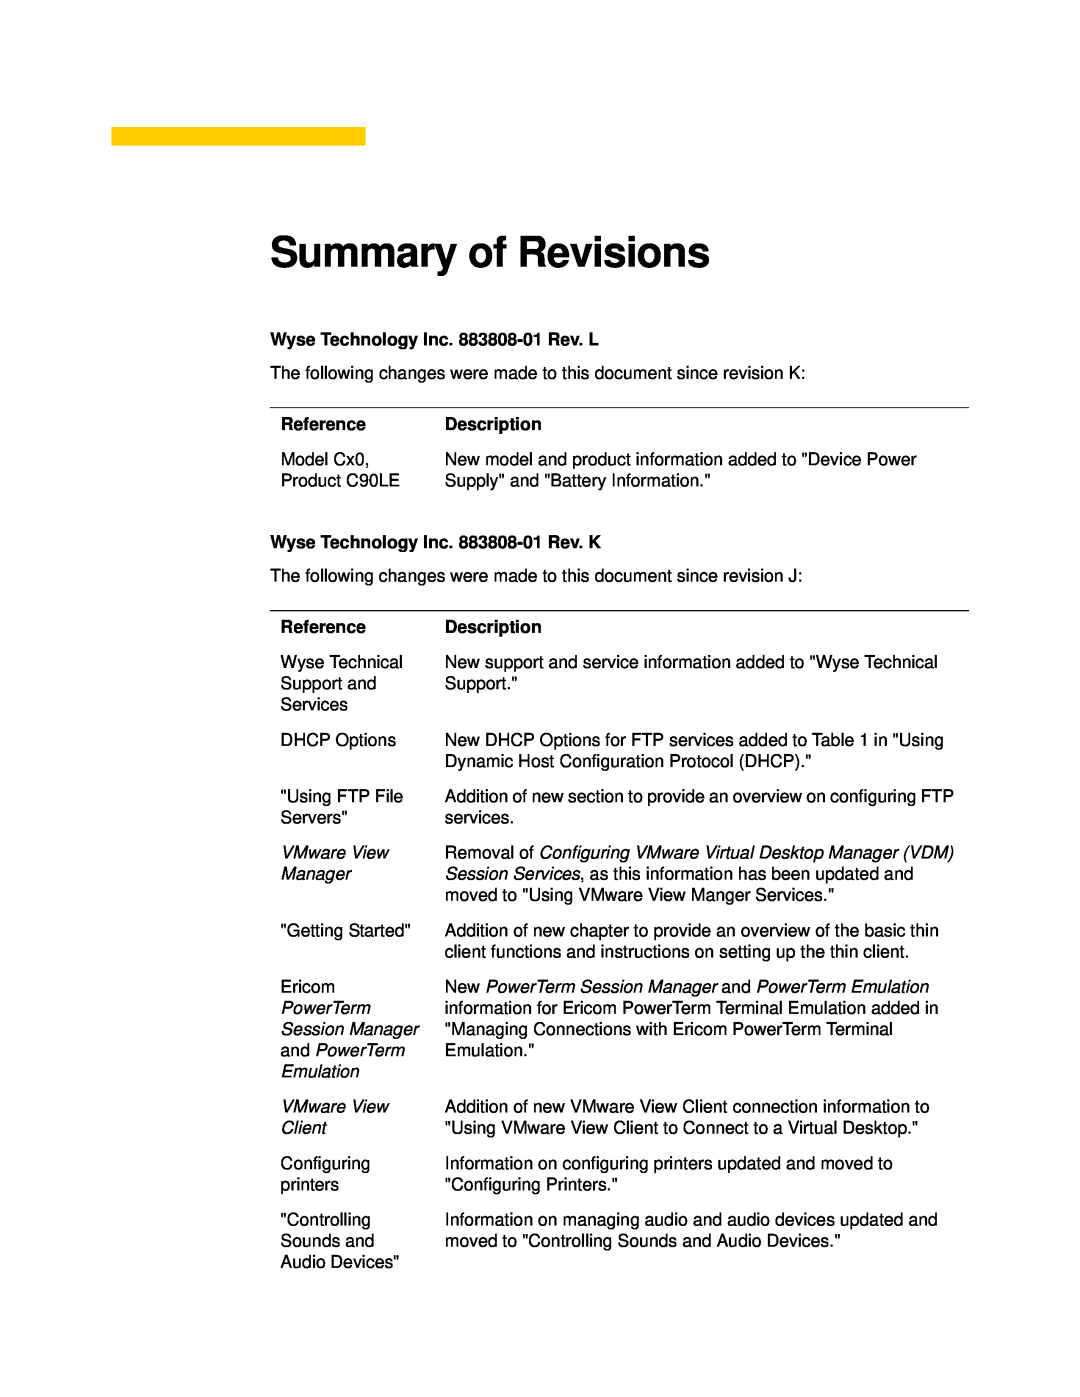 Wyse Technology C90LE, R90L manual Summary of Revisions, Wyse Technology Inc. 883808-01 Rev. L, Reference, Description 